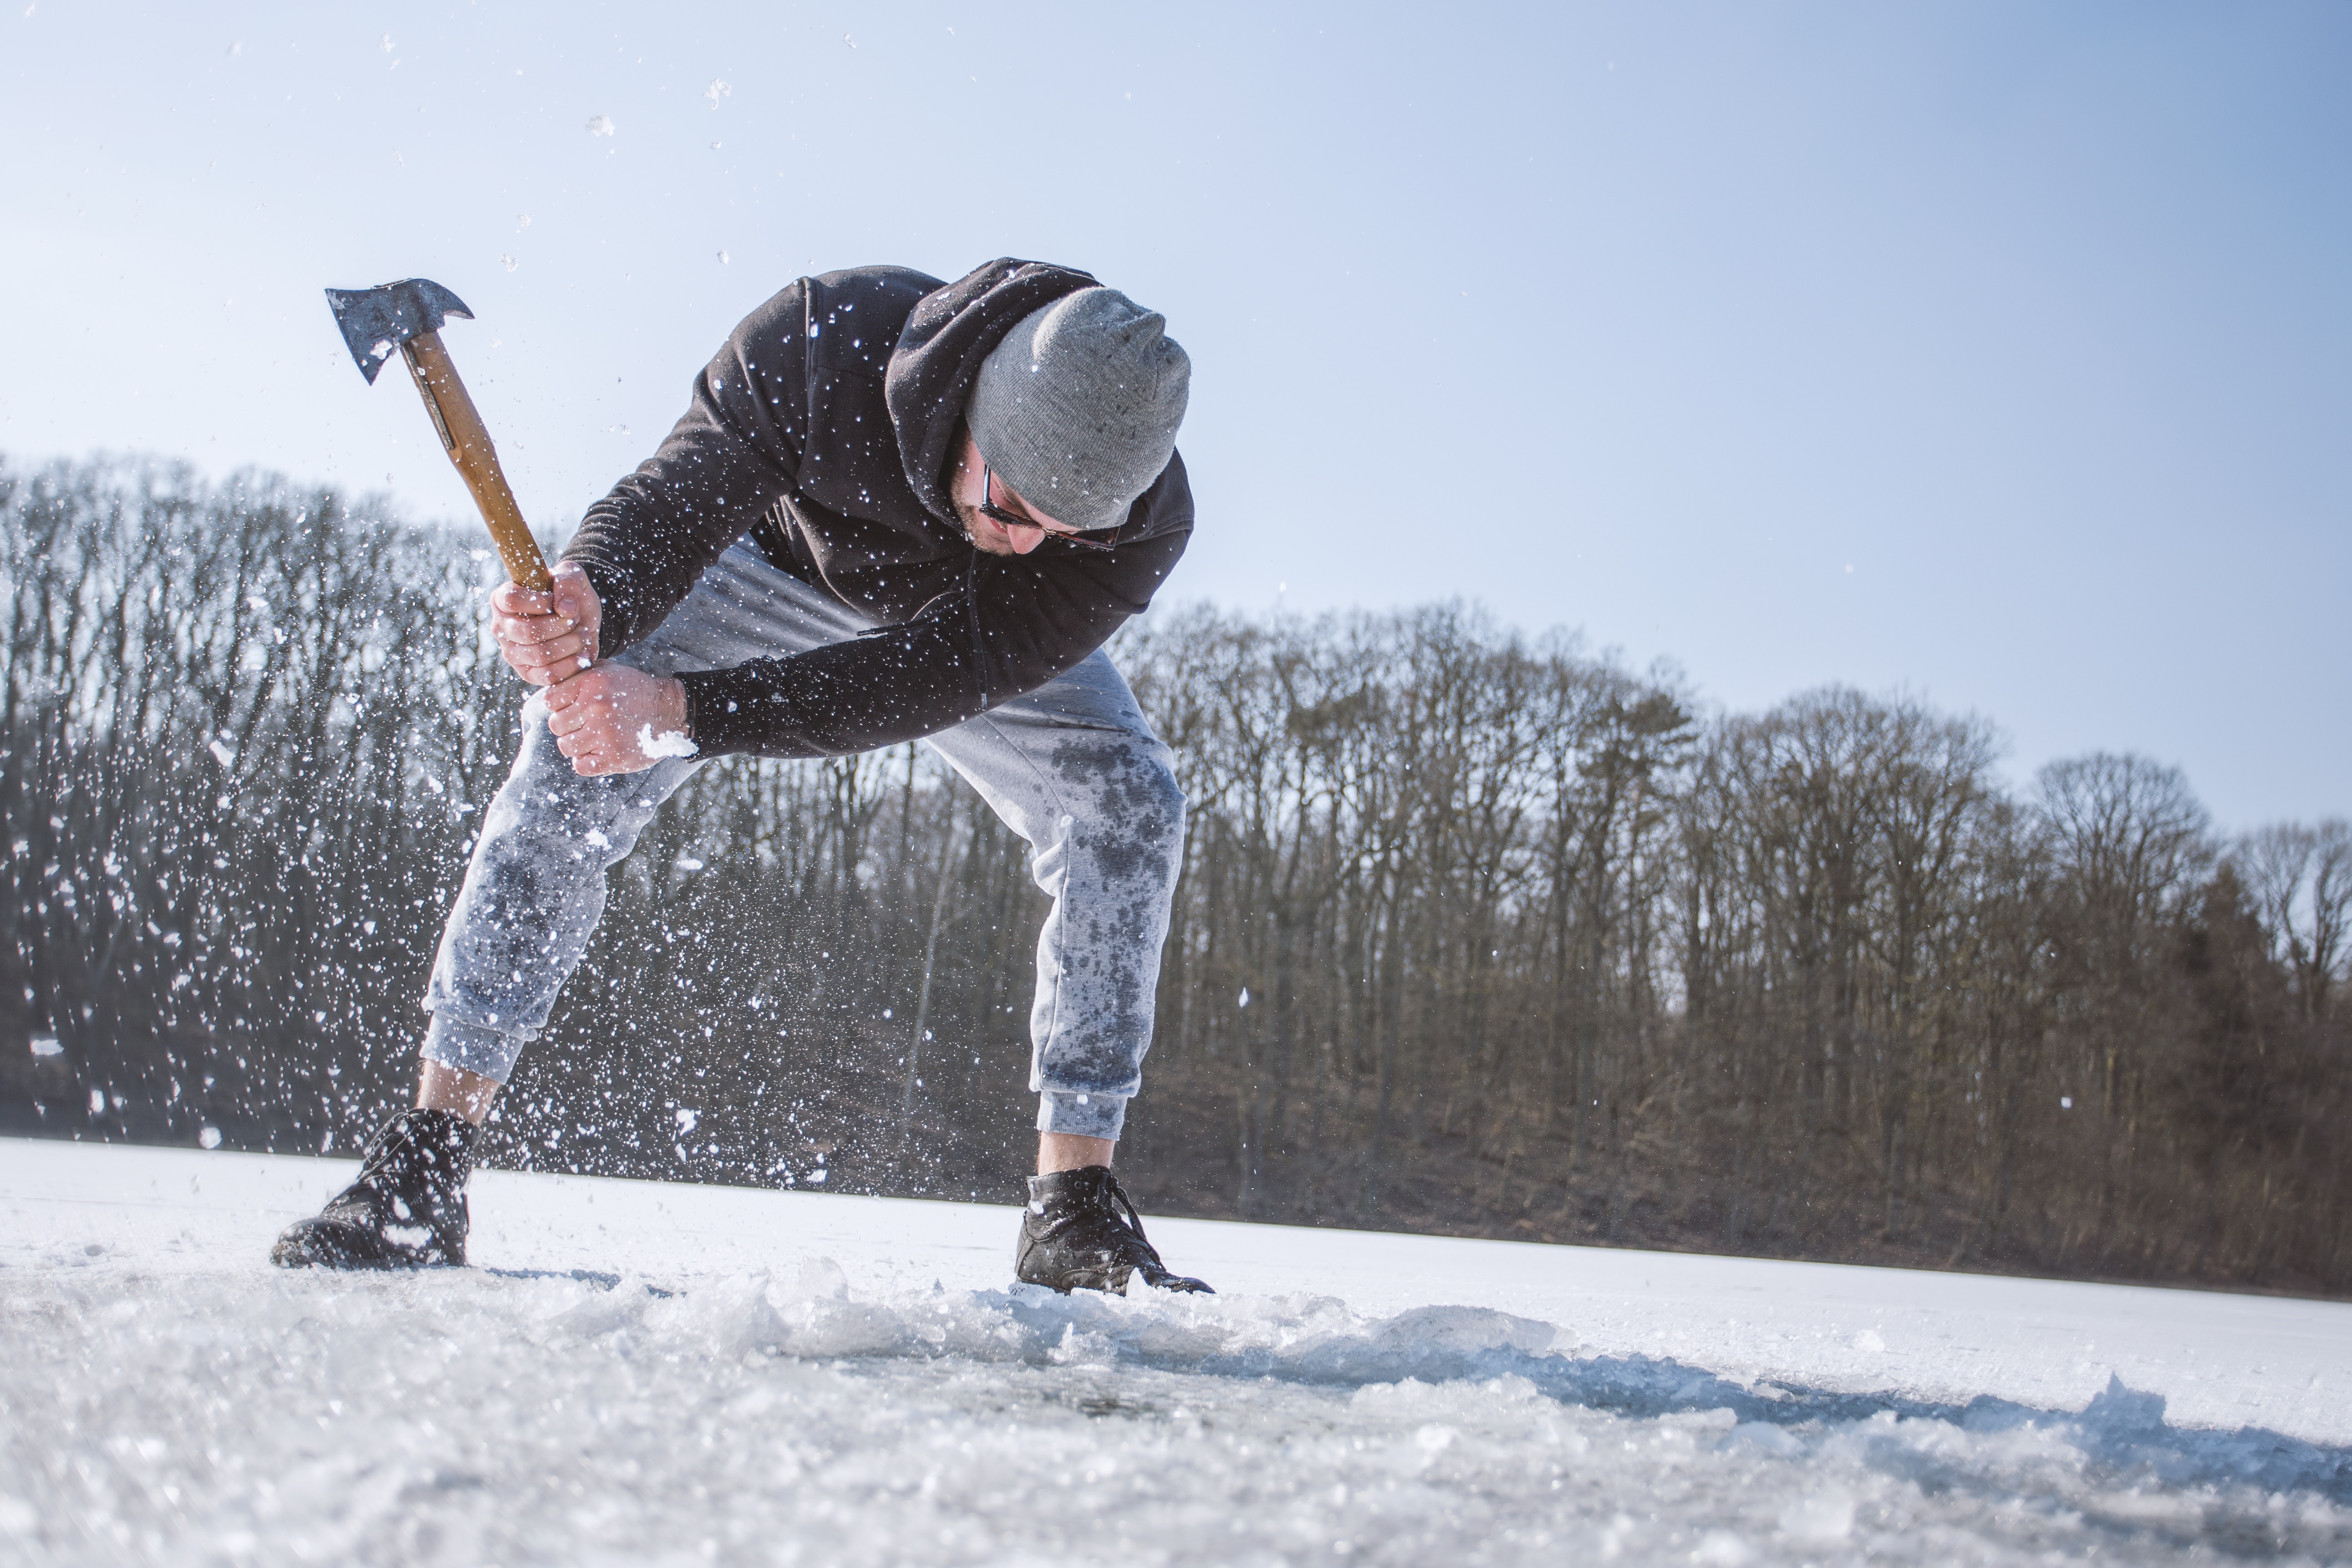 Man Wearing Black Hooded Jacket, Gray Knit Cap, Gray Pants, and Black Shoes Holding Brown Handled Axe While Bending on Snow, Action, Motion, Work, Winter, HQ Photo